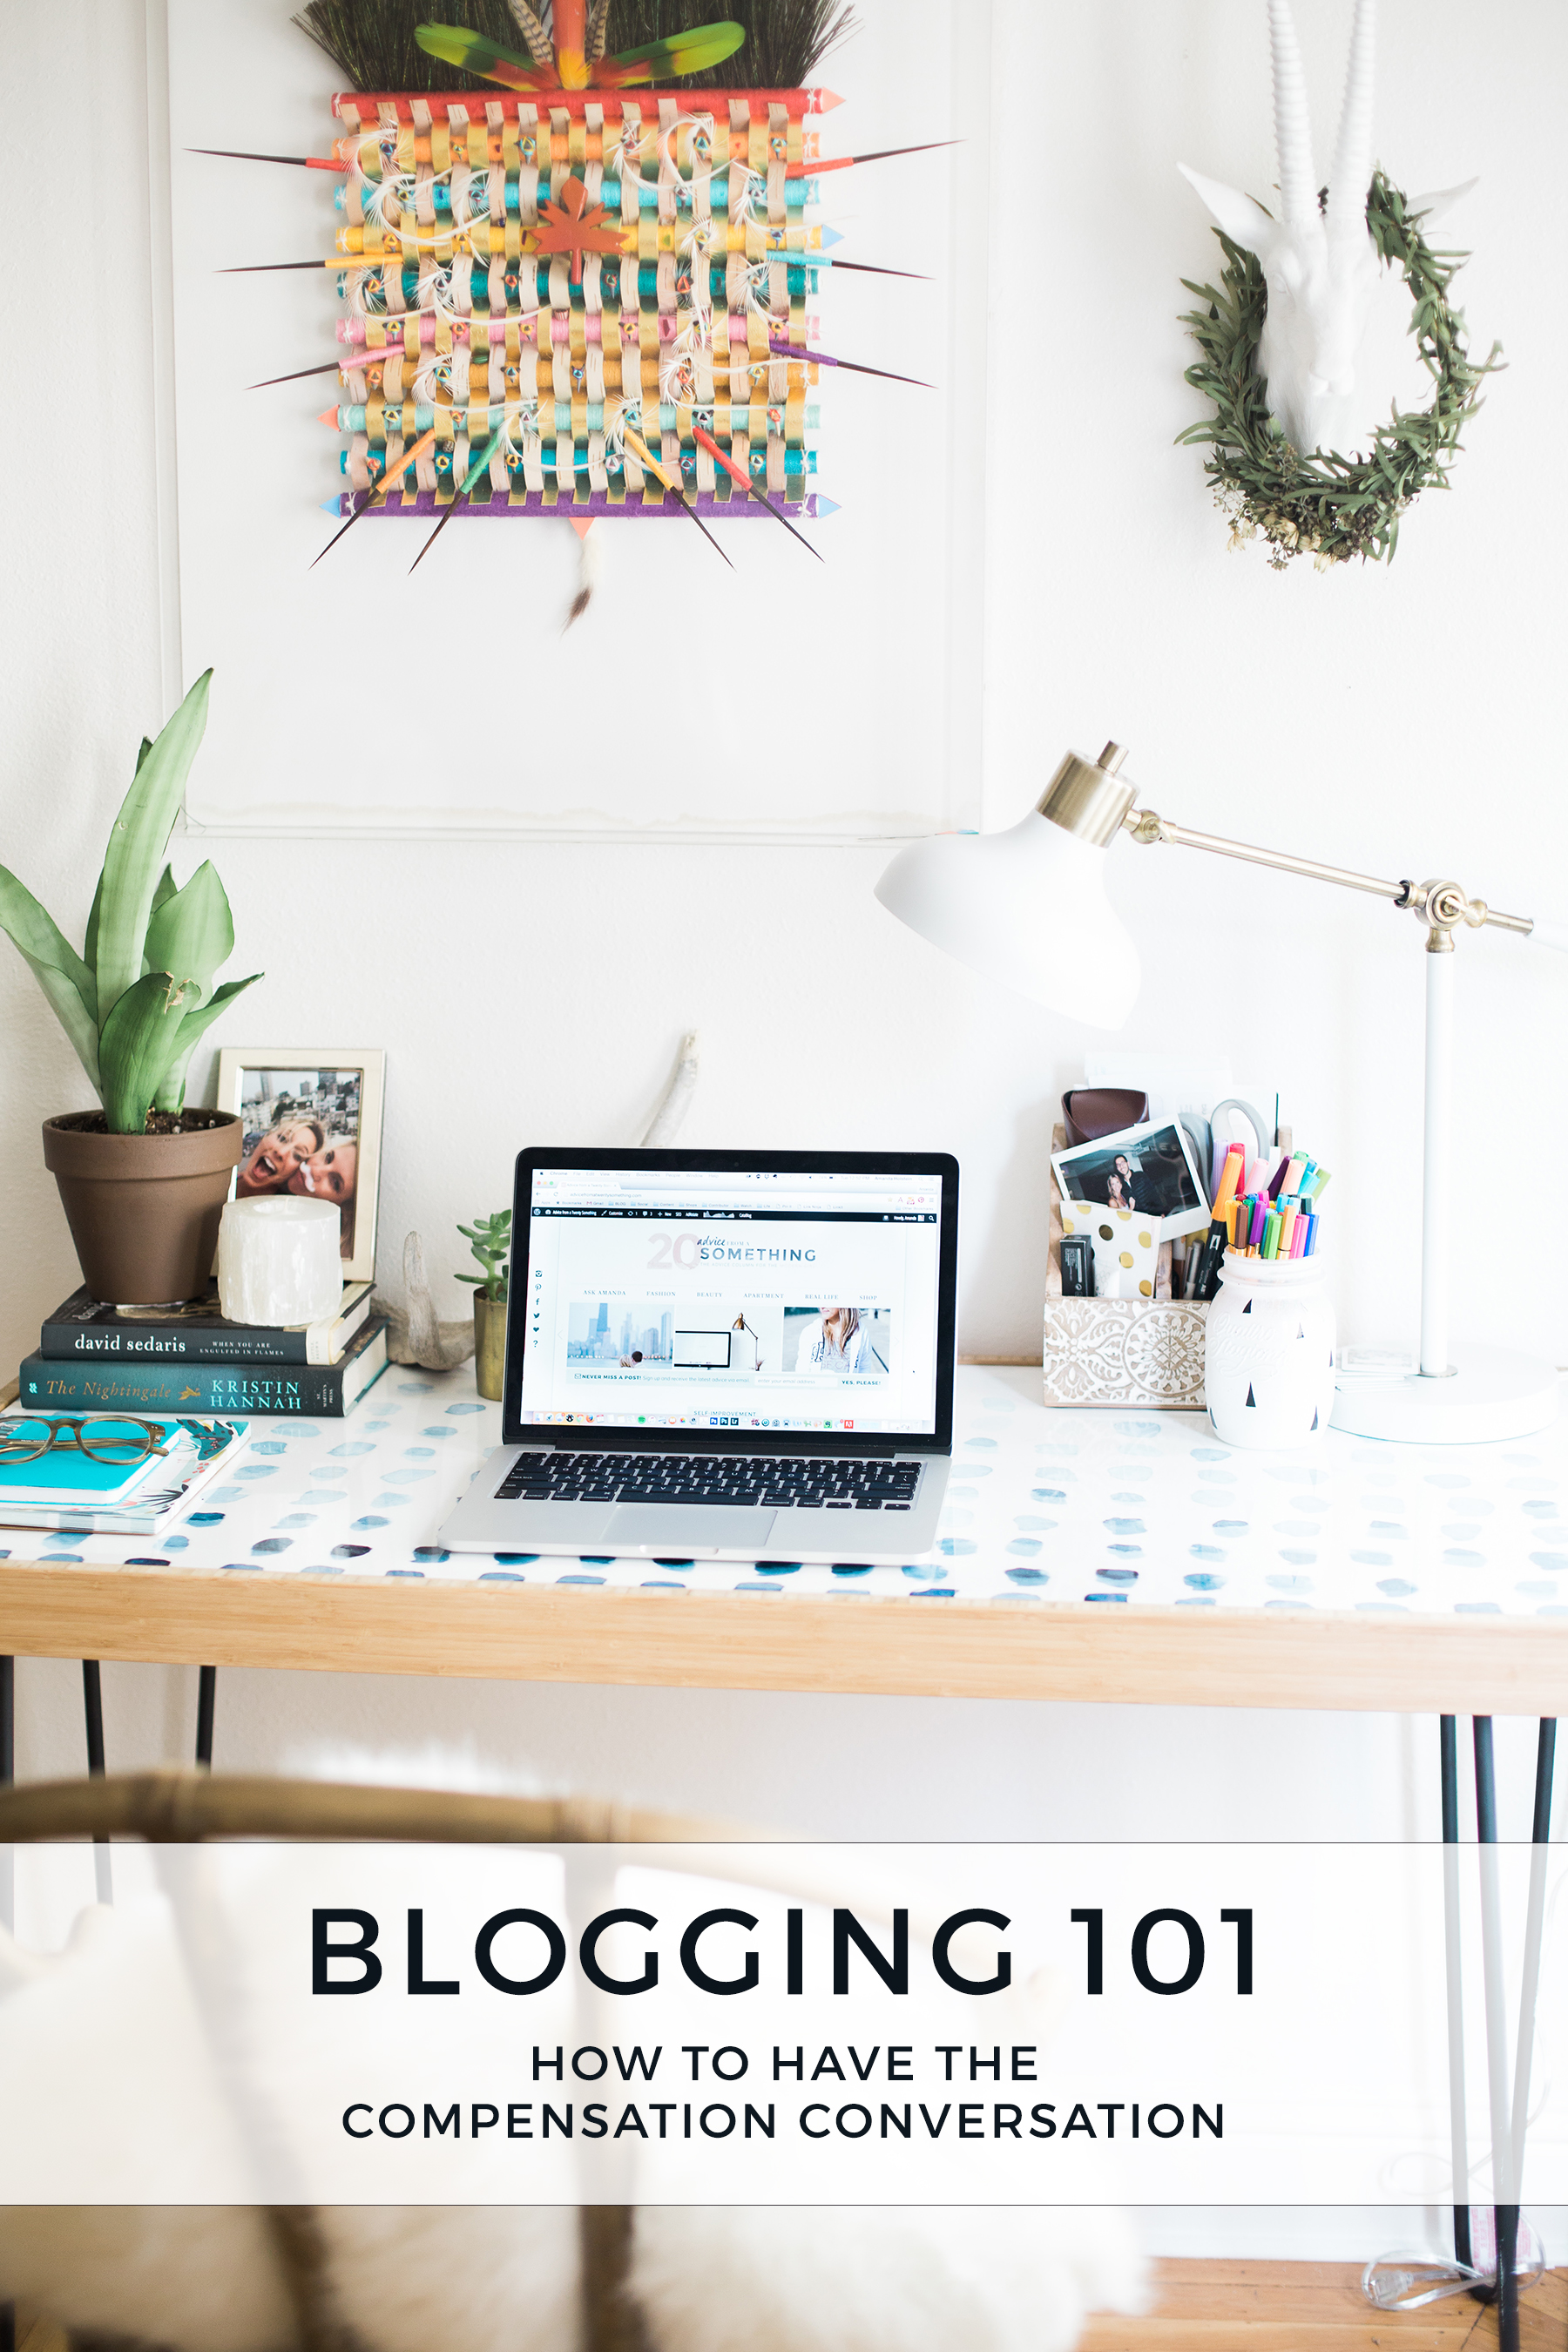 blogging 101, blogging advice, tips for new bloggers, blog compensation, blogger compensation, blog campaigns, blogs and brands, boho desk, desk decor, bright and white, deny designs desk, target lamp, white lamp, computer on desk, stylish desk, stylish home office, office space, bohemian decor, photography by Andrea Posadas for Advicefroma20Something.com